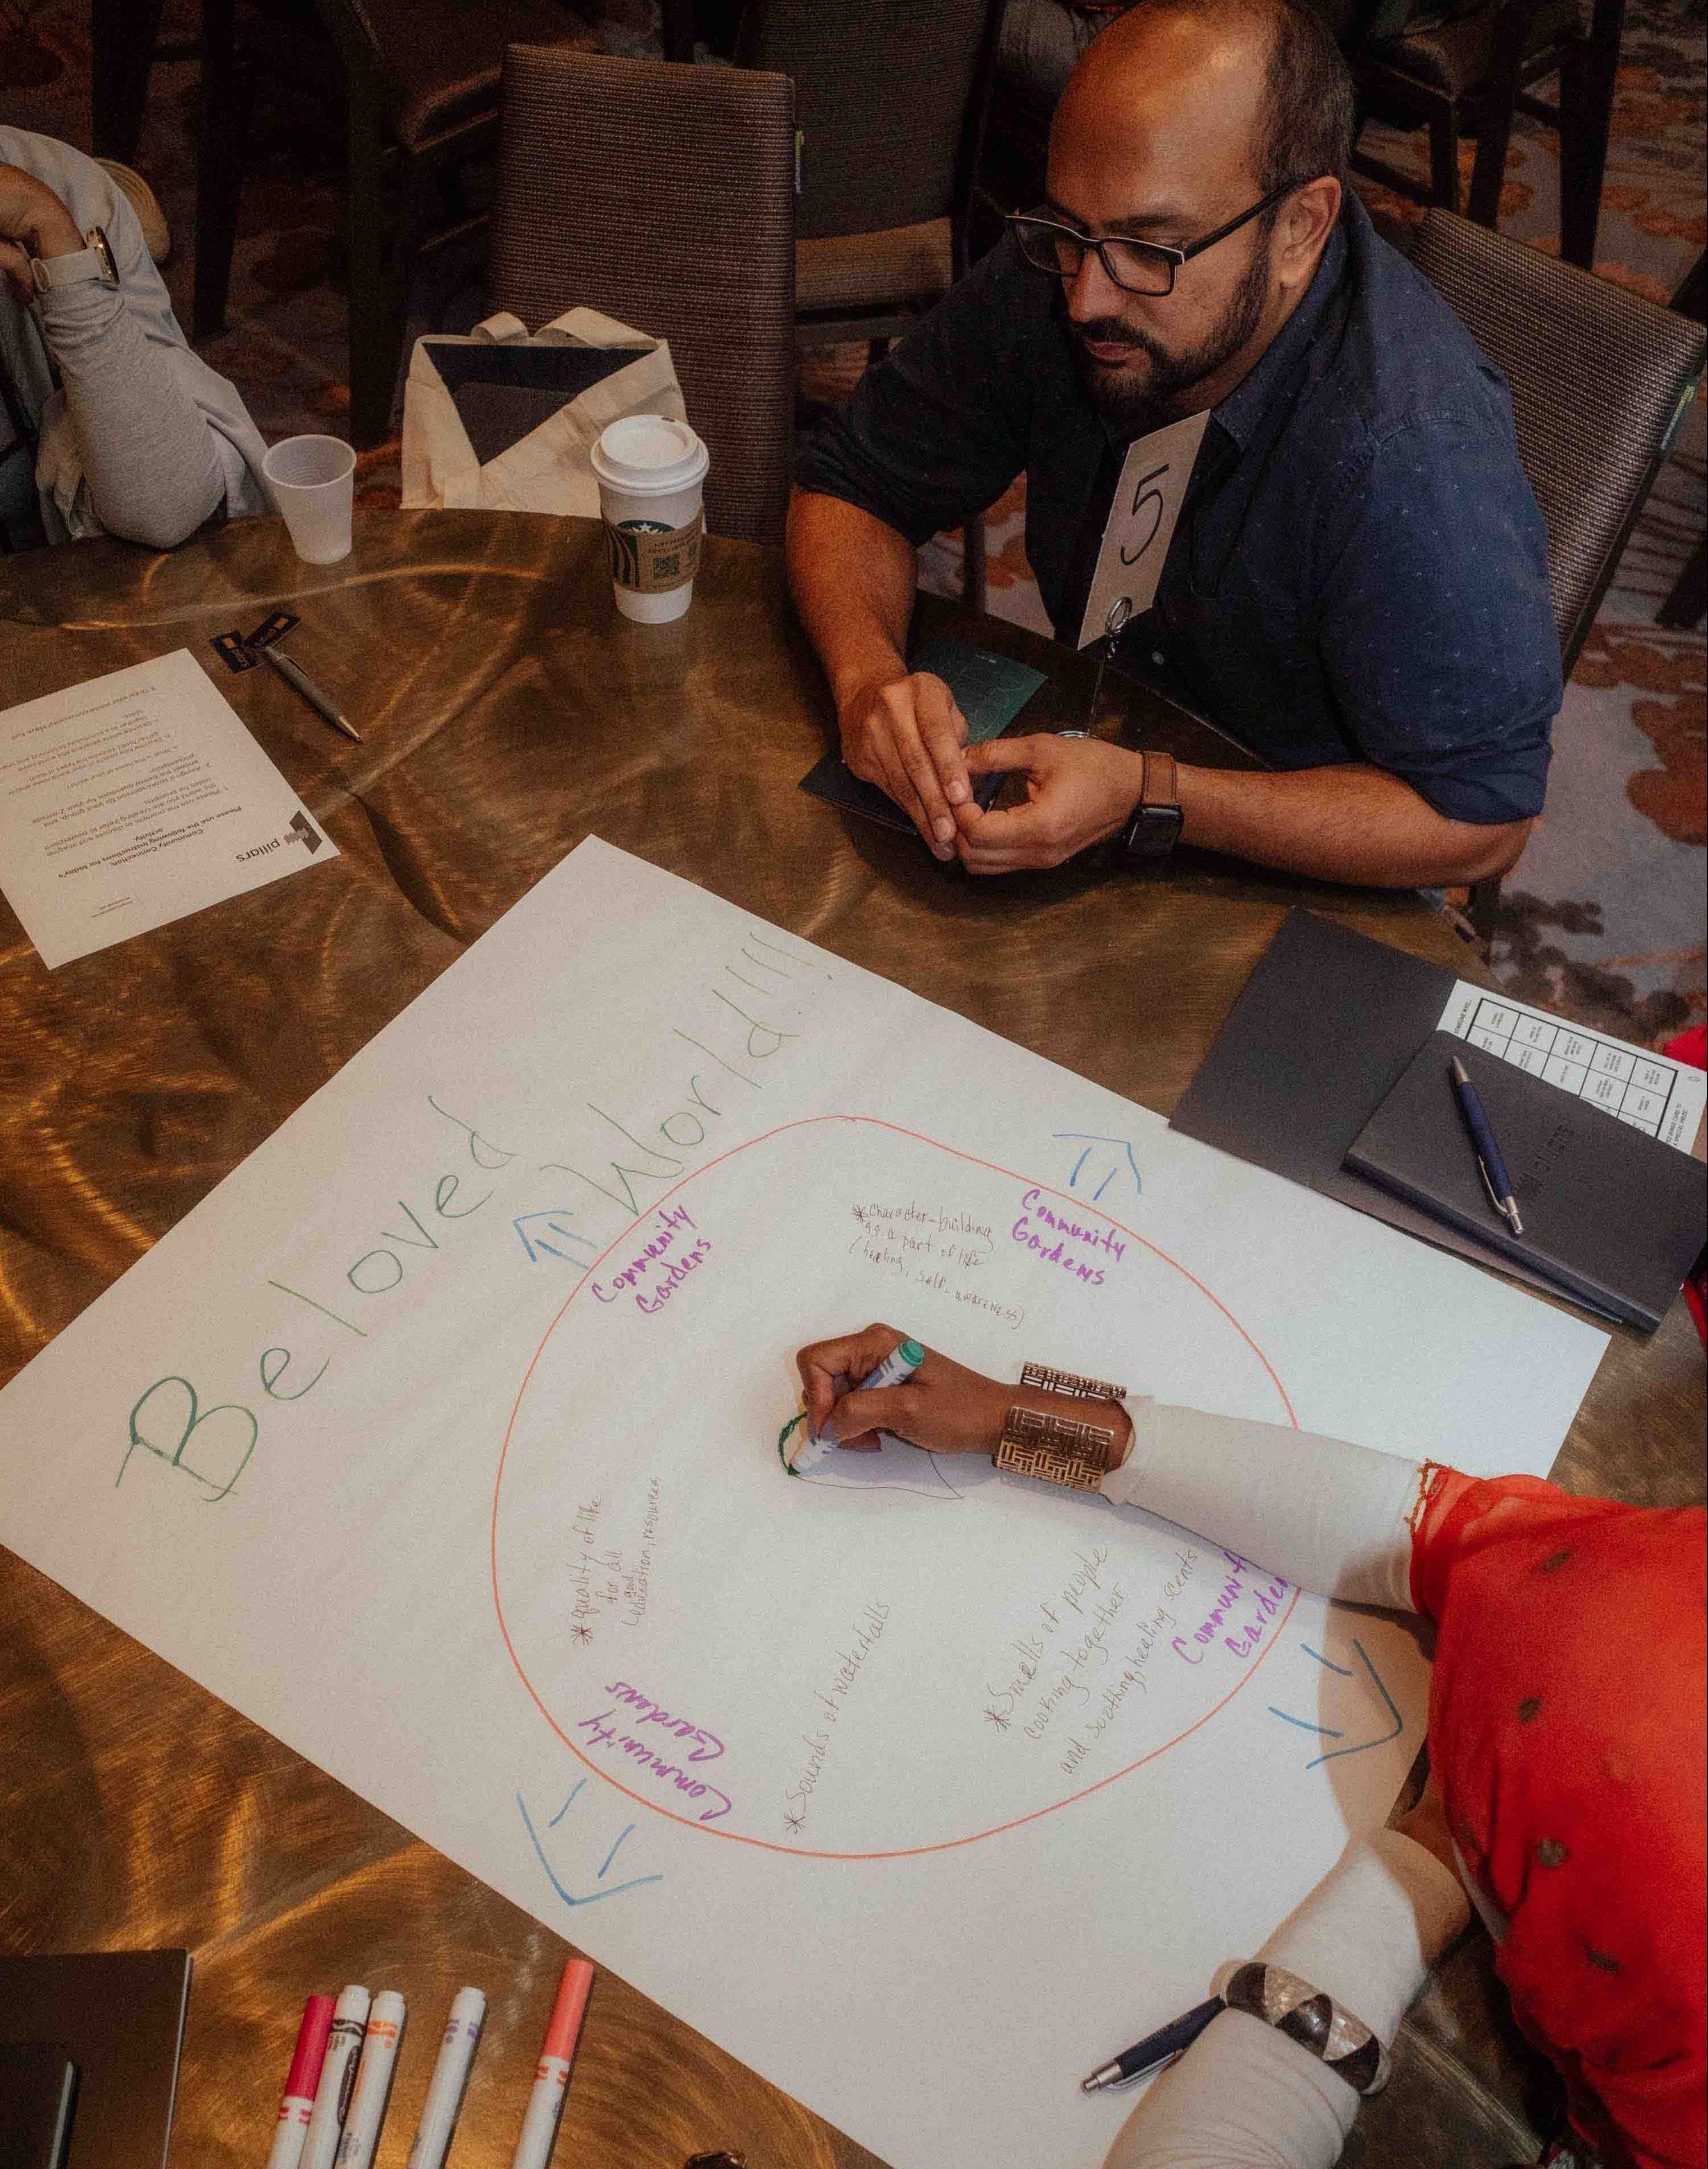 Convening participants sit around a round table drawing on a large sheet of white paper